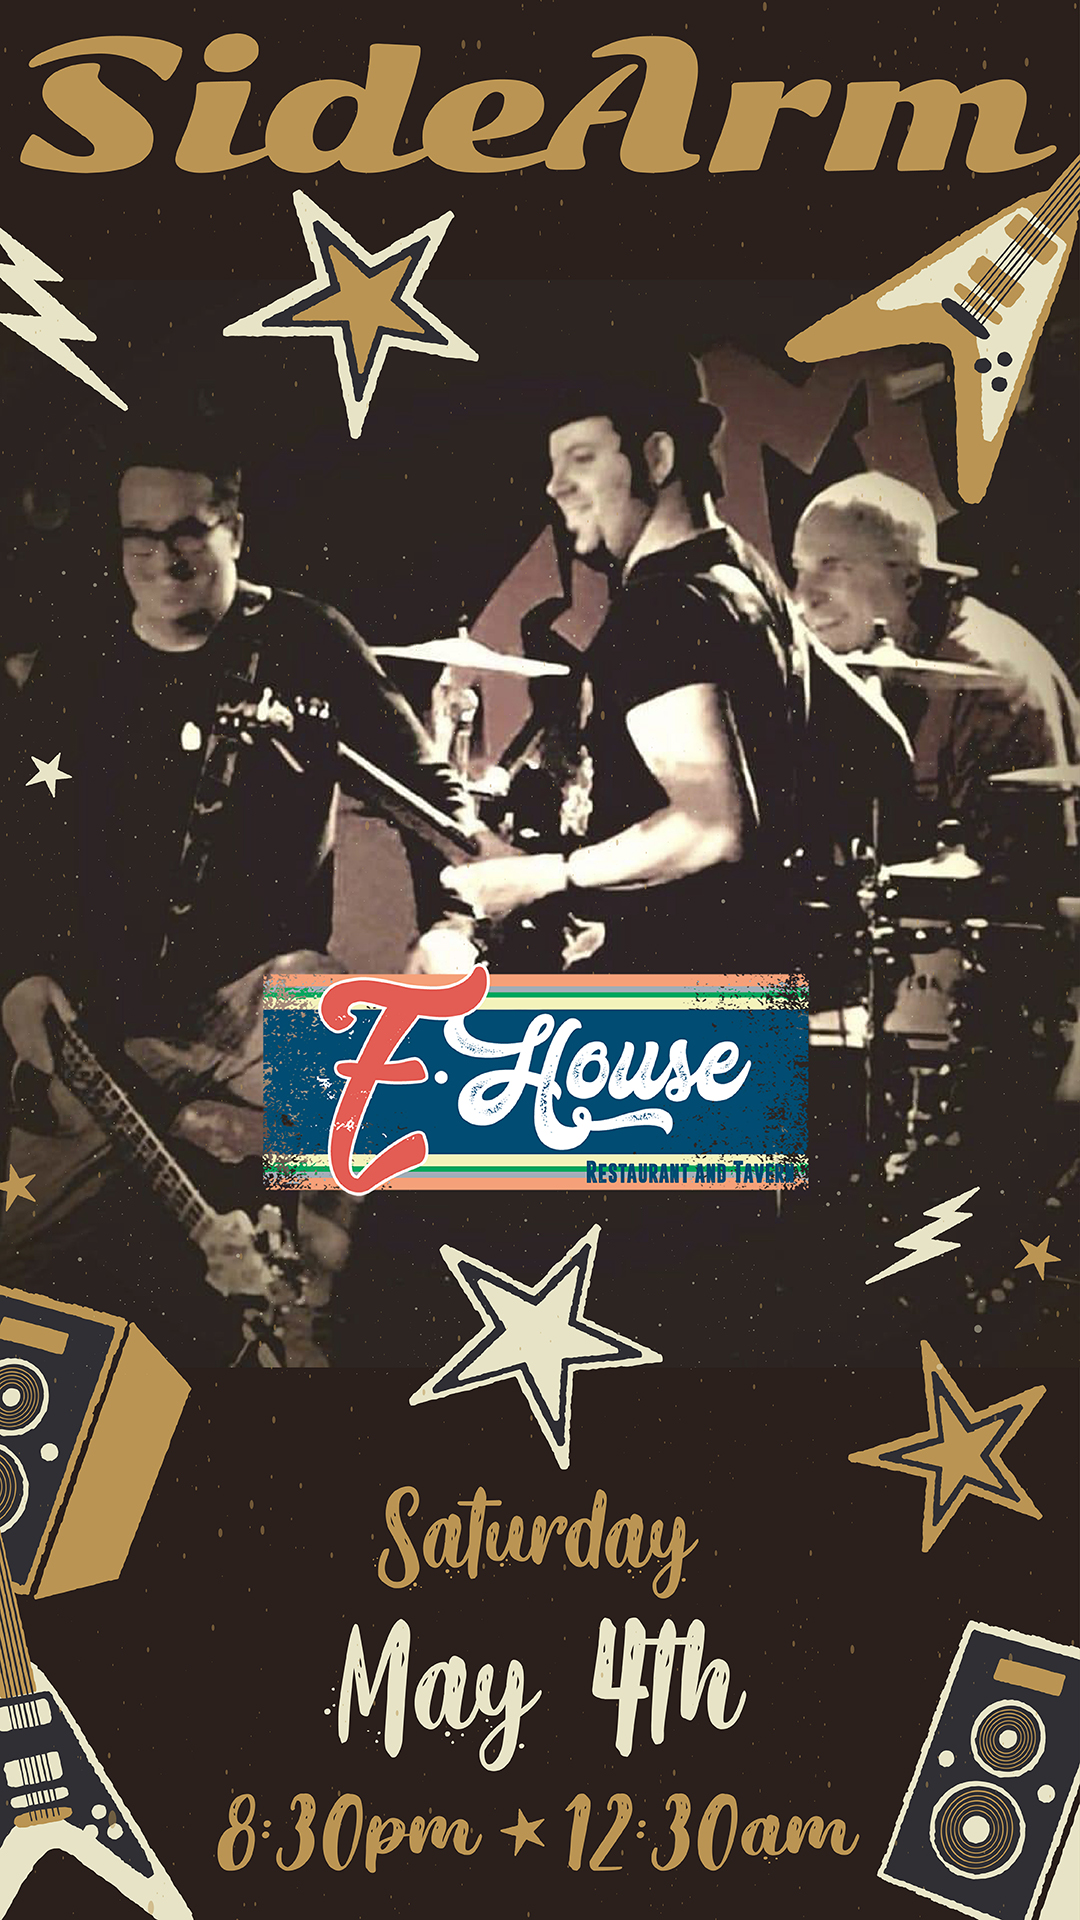 Poster for a live music event featuring the band "sidearm" at e-house restaurant, scheduled for may 4th from 8:30 pm to 12:30 am, with graphic designs of stars, speakers, and guitars.